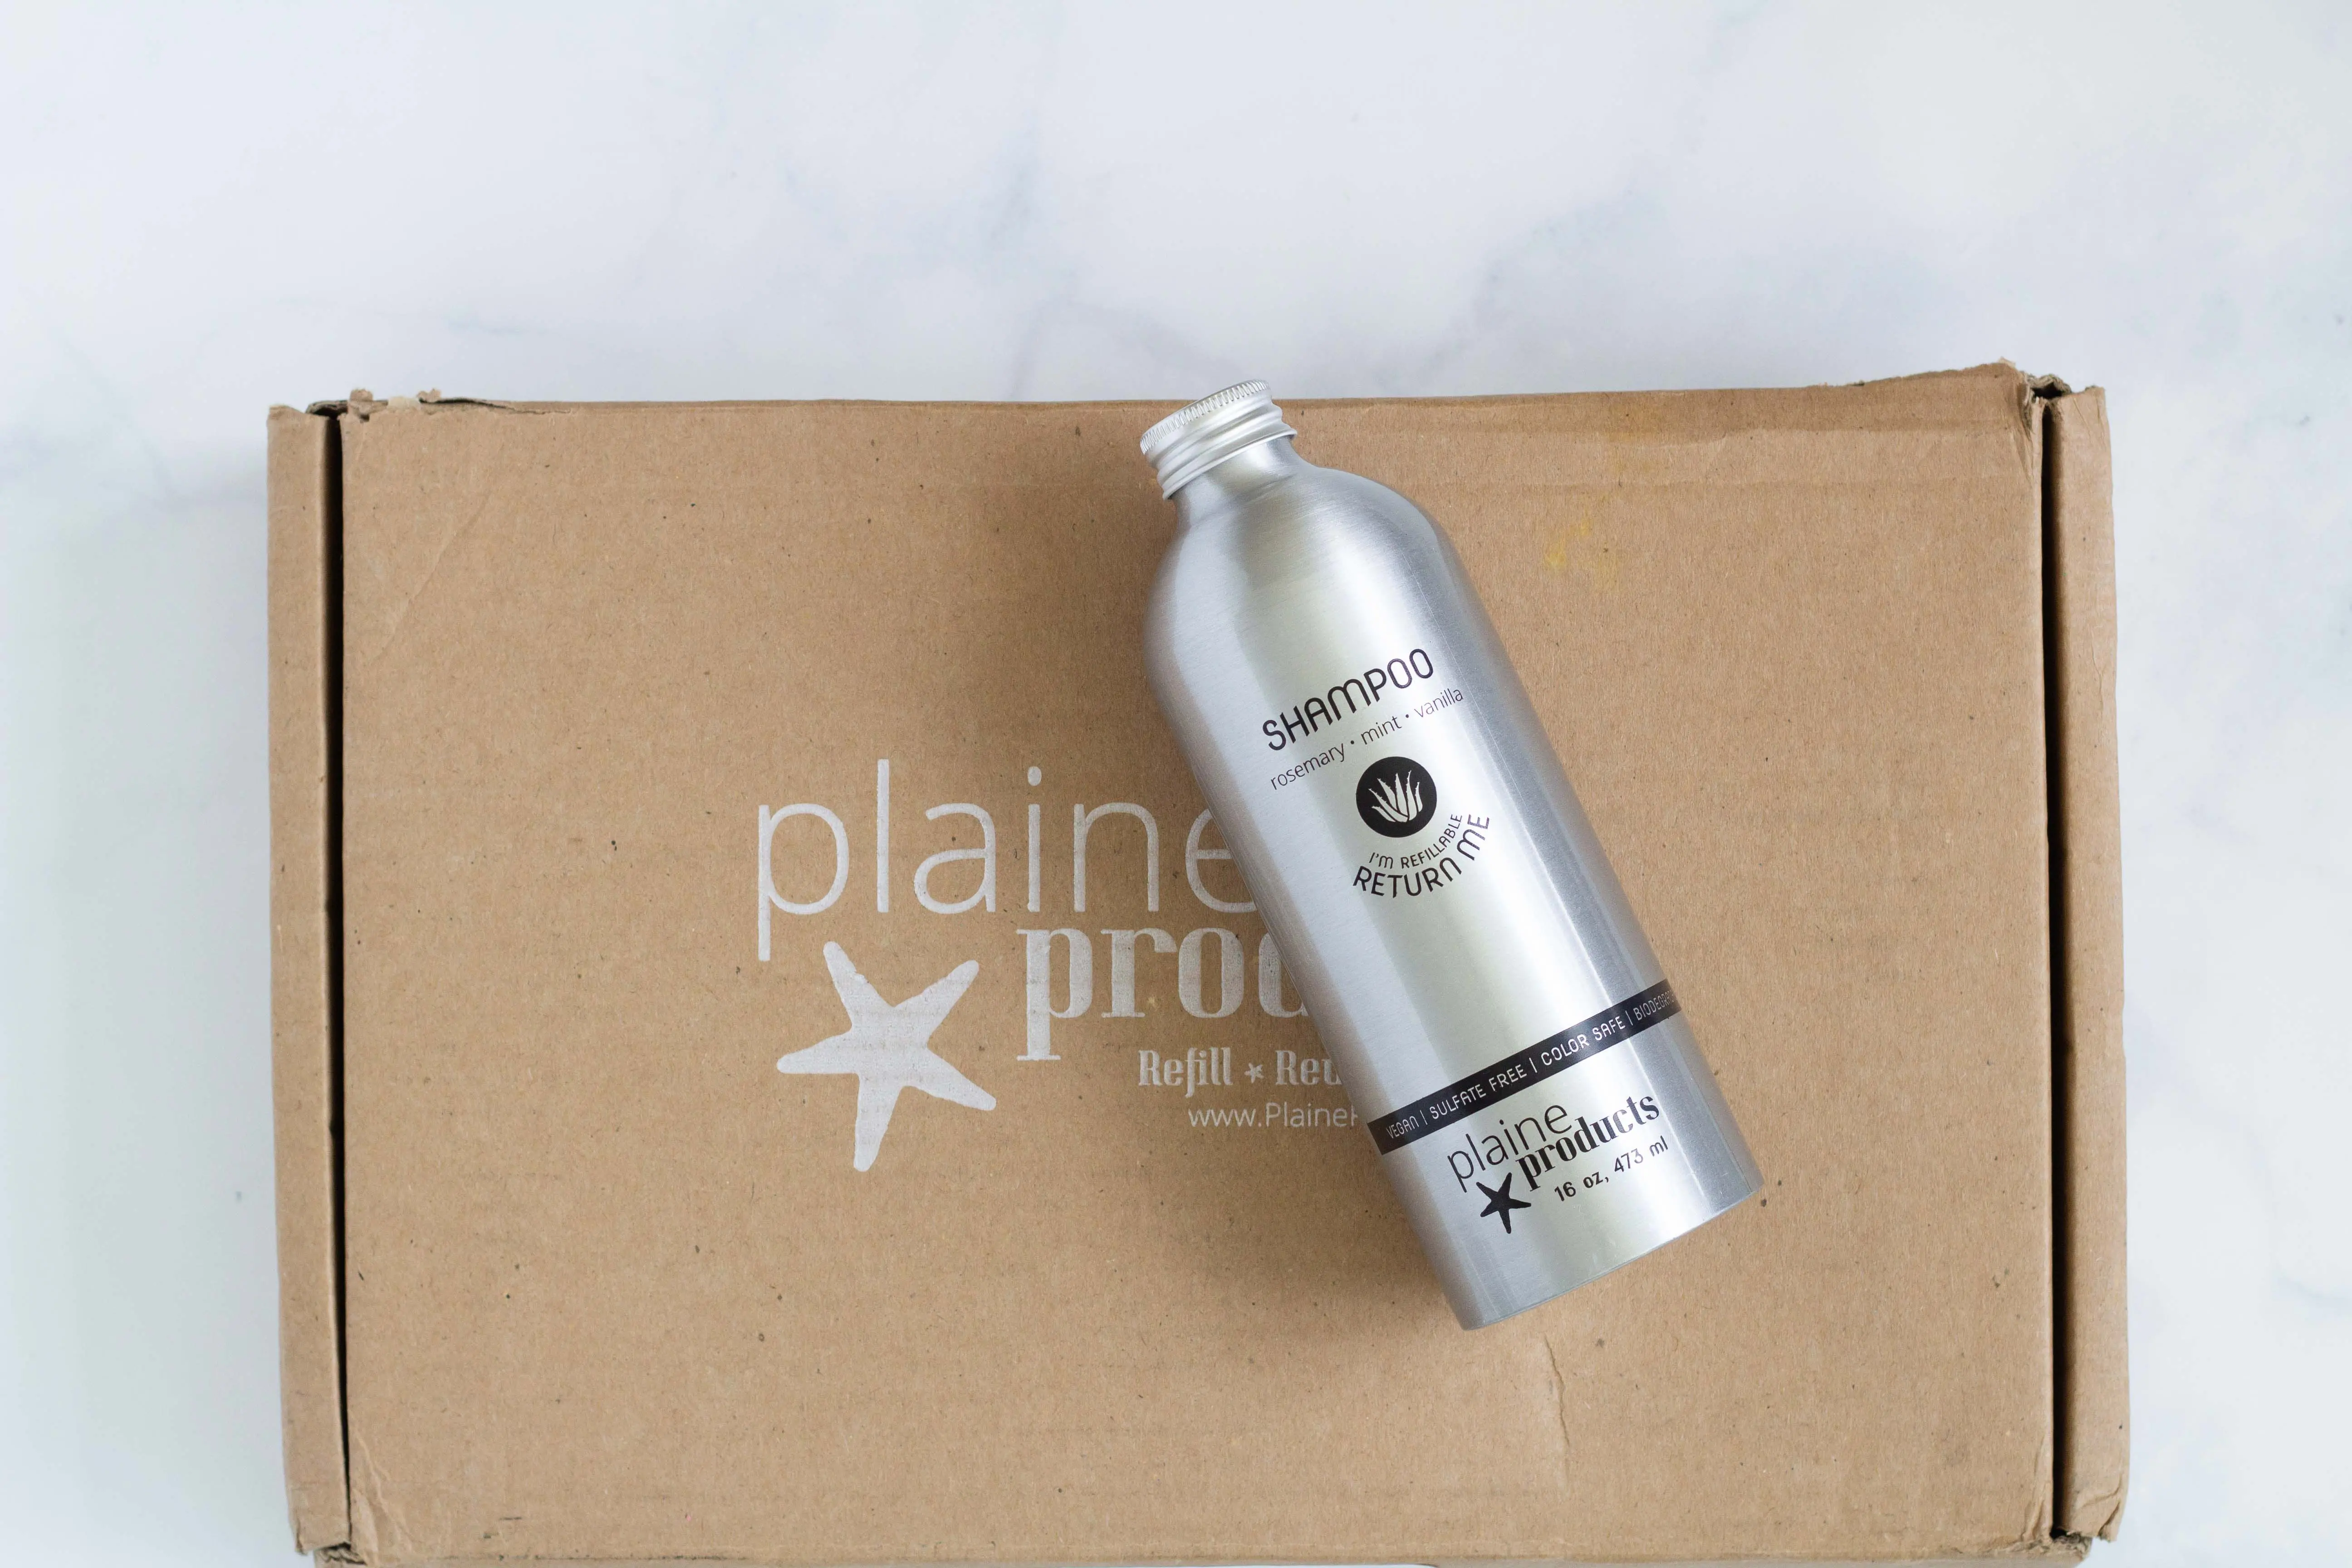 Plaine Products - Environmentally Friendly Personal Care Products